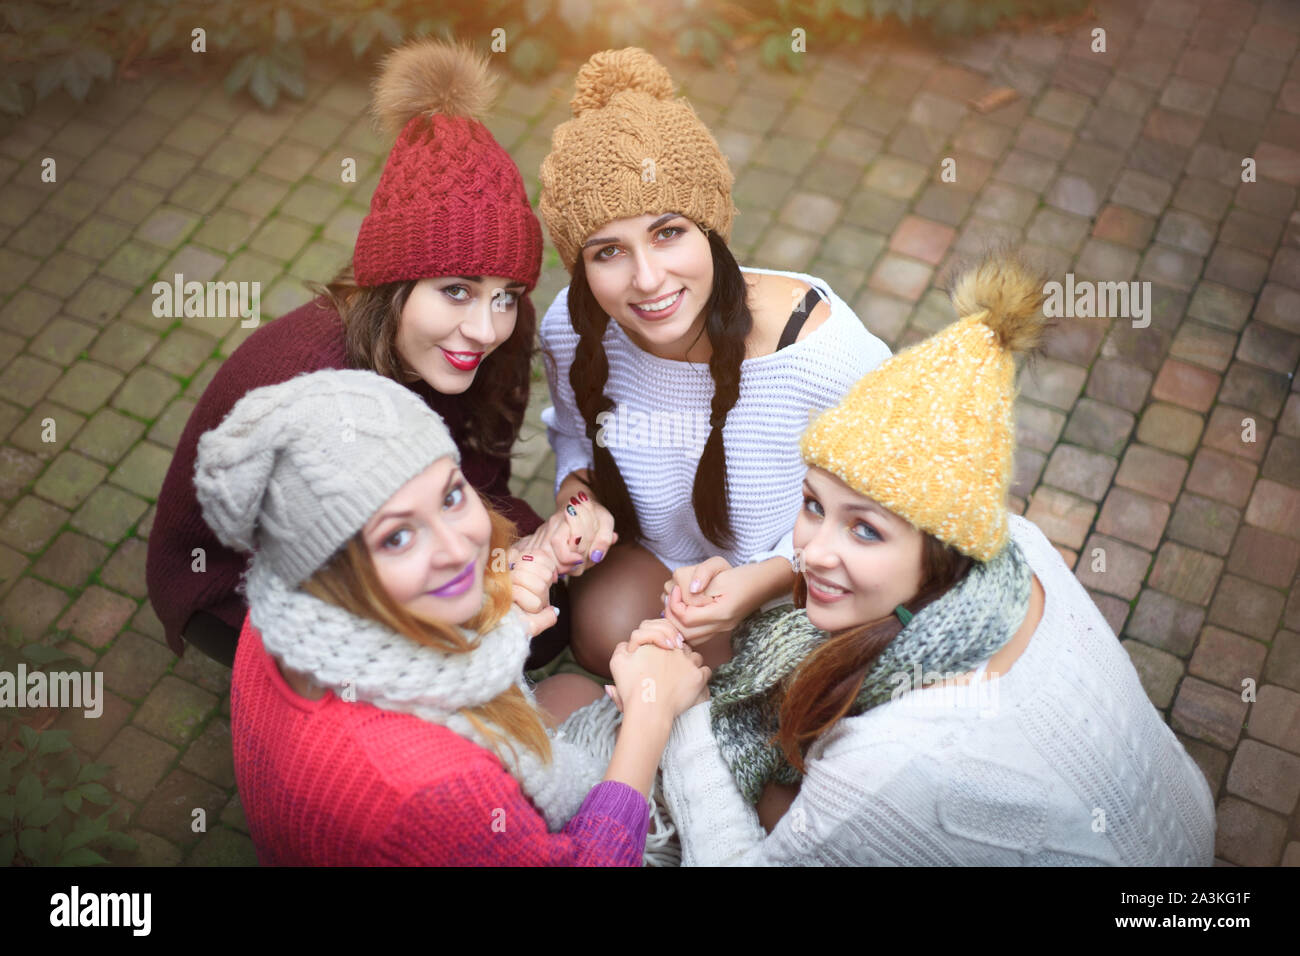 Girls in warm knitted clothes and hats hug, top view. Autumn day, a group of friends. Positive emotions. Stock Photo